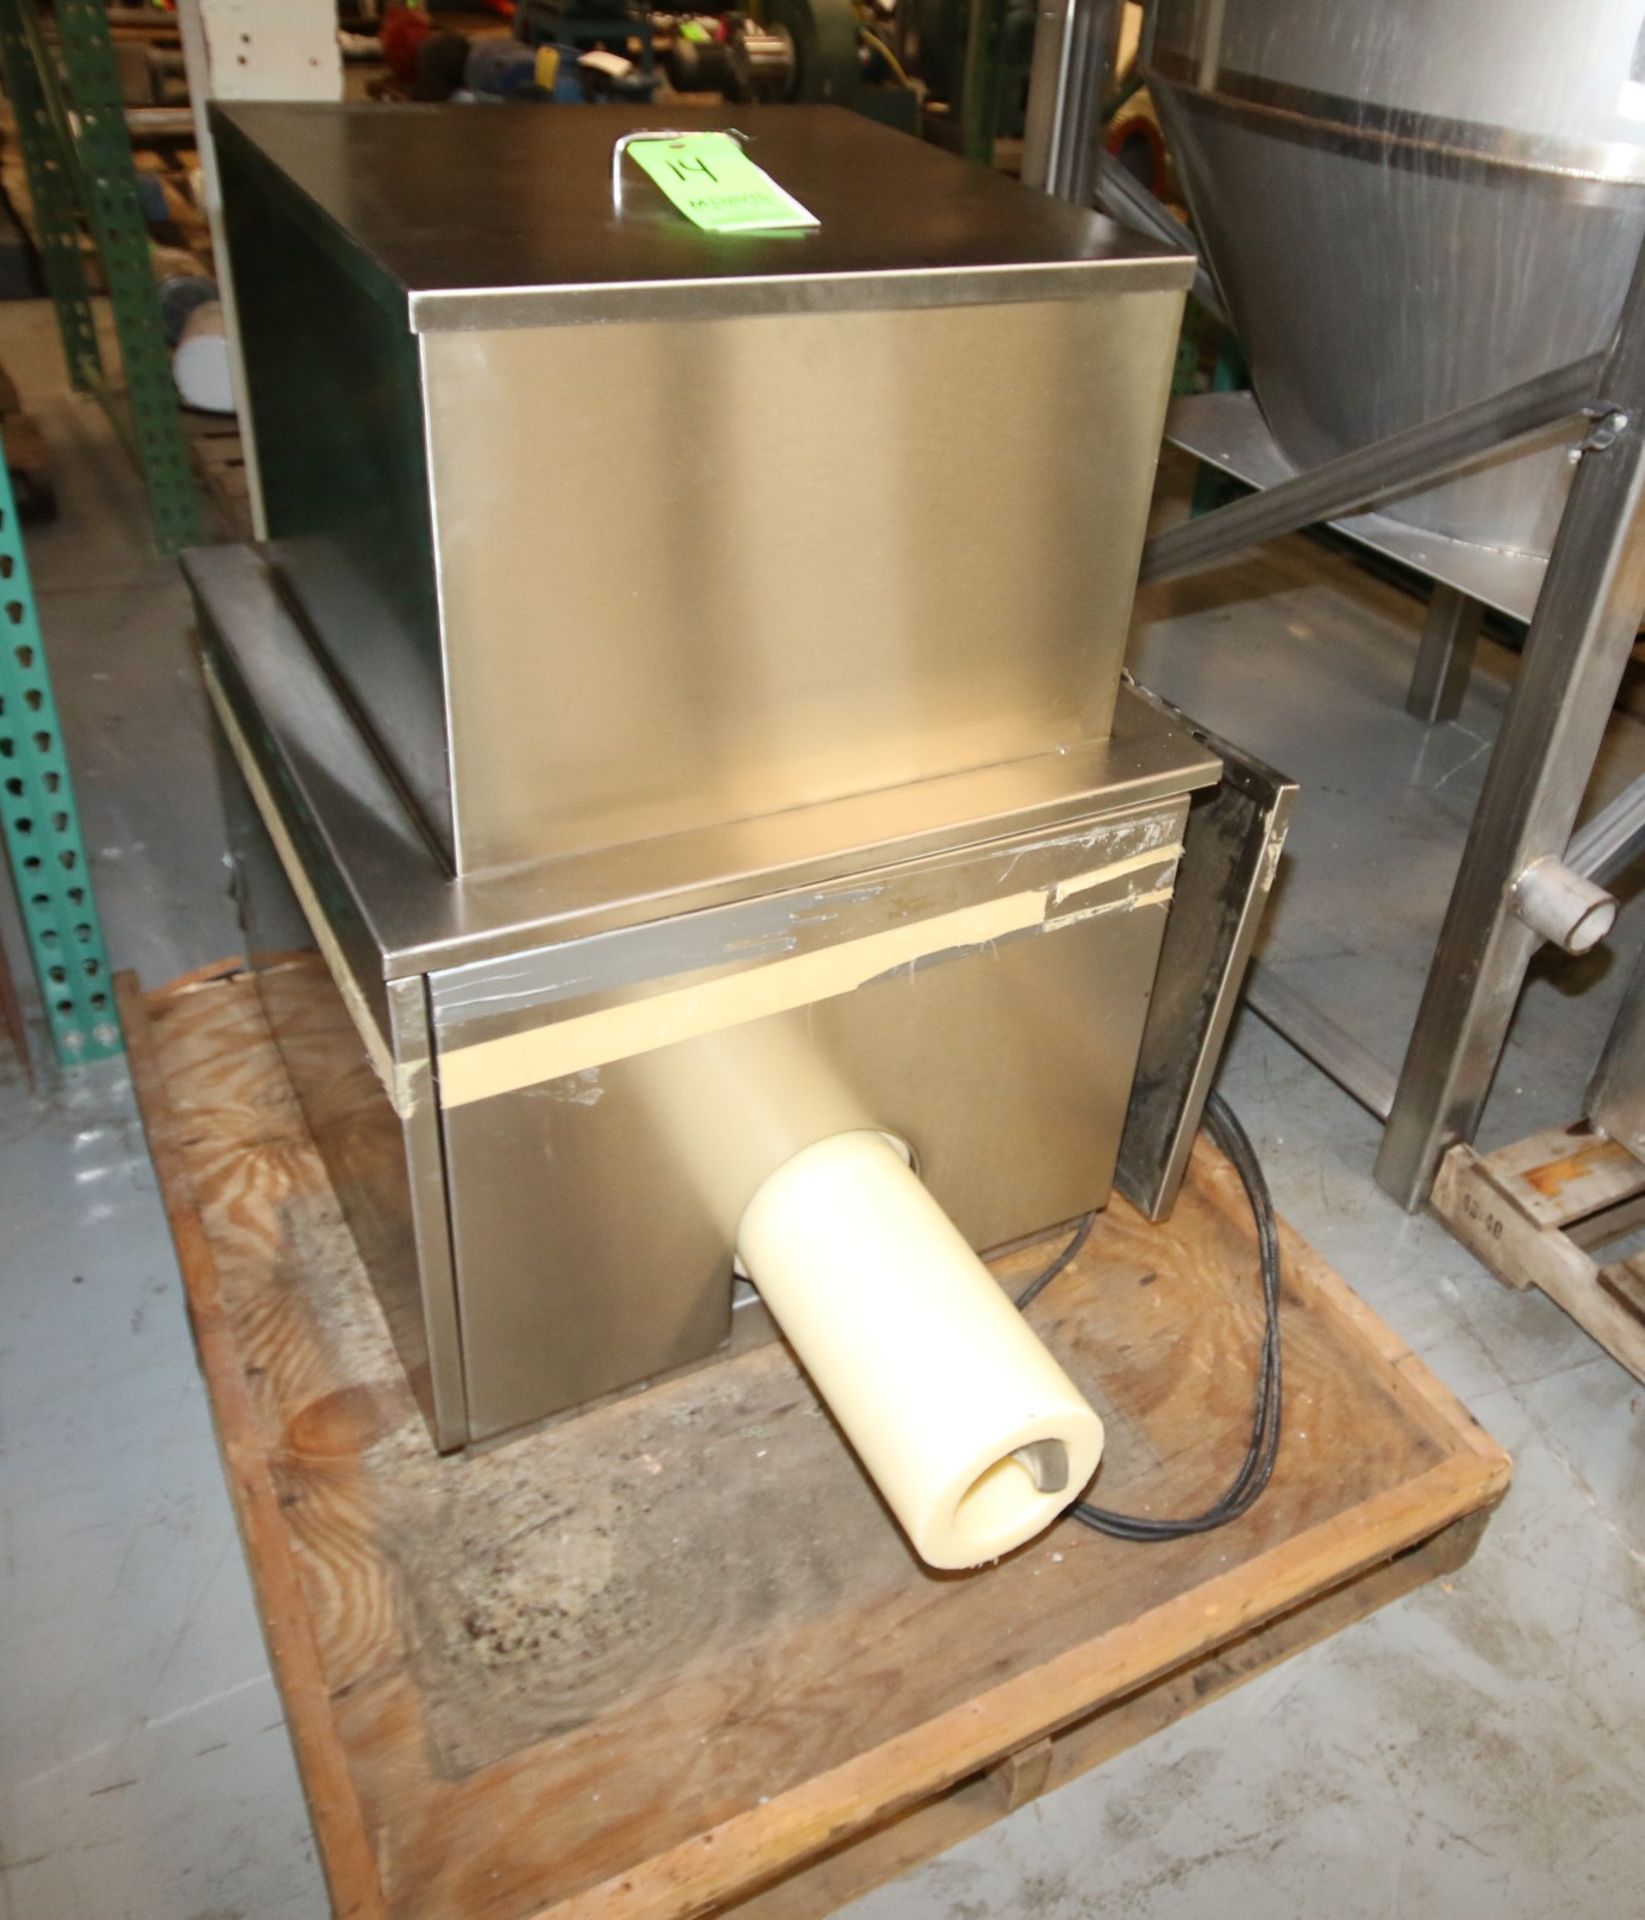 Accu-Rate S/S Dry Material Feeder, S/N 1204-88-0189, with 22" W x 22" W x 34" D Hopper with Lid,